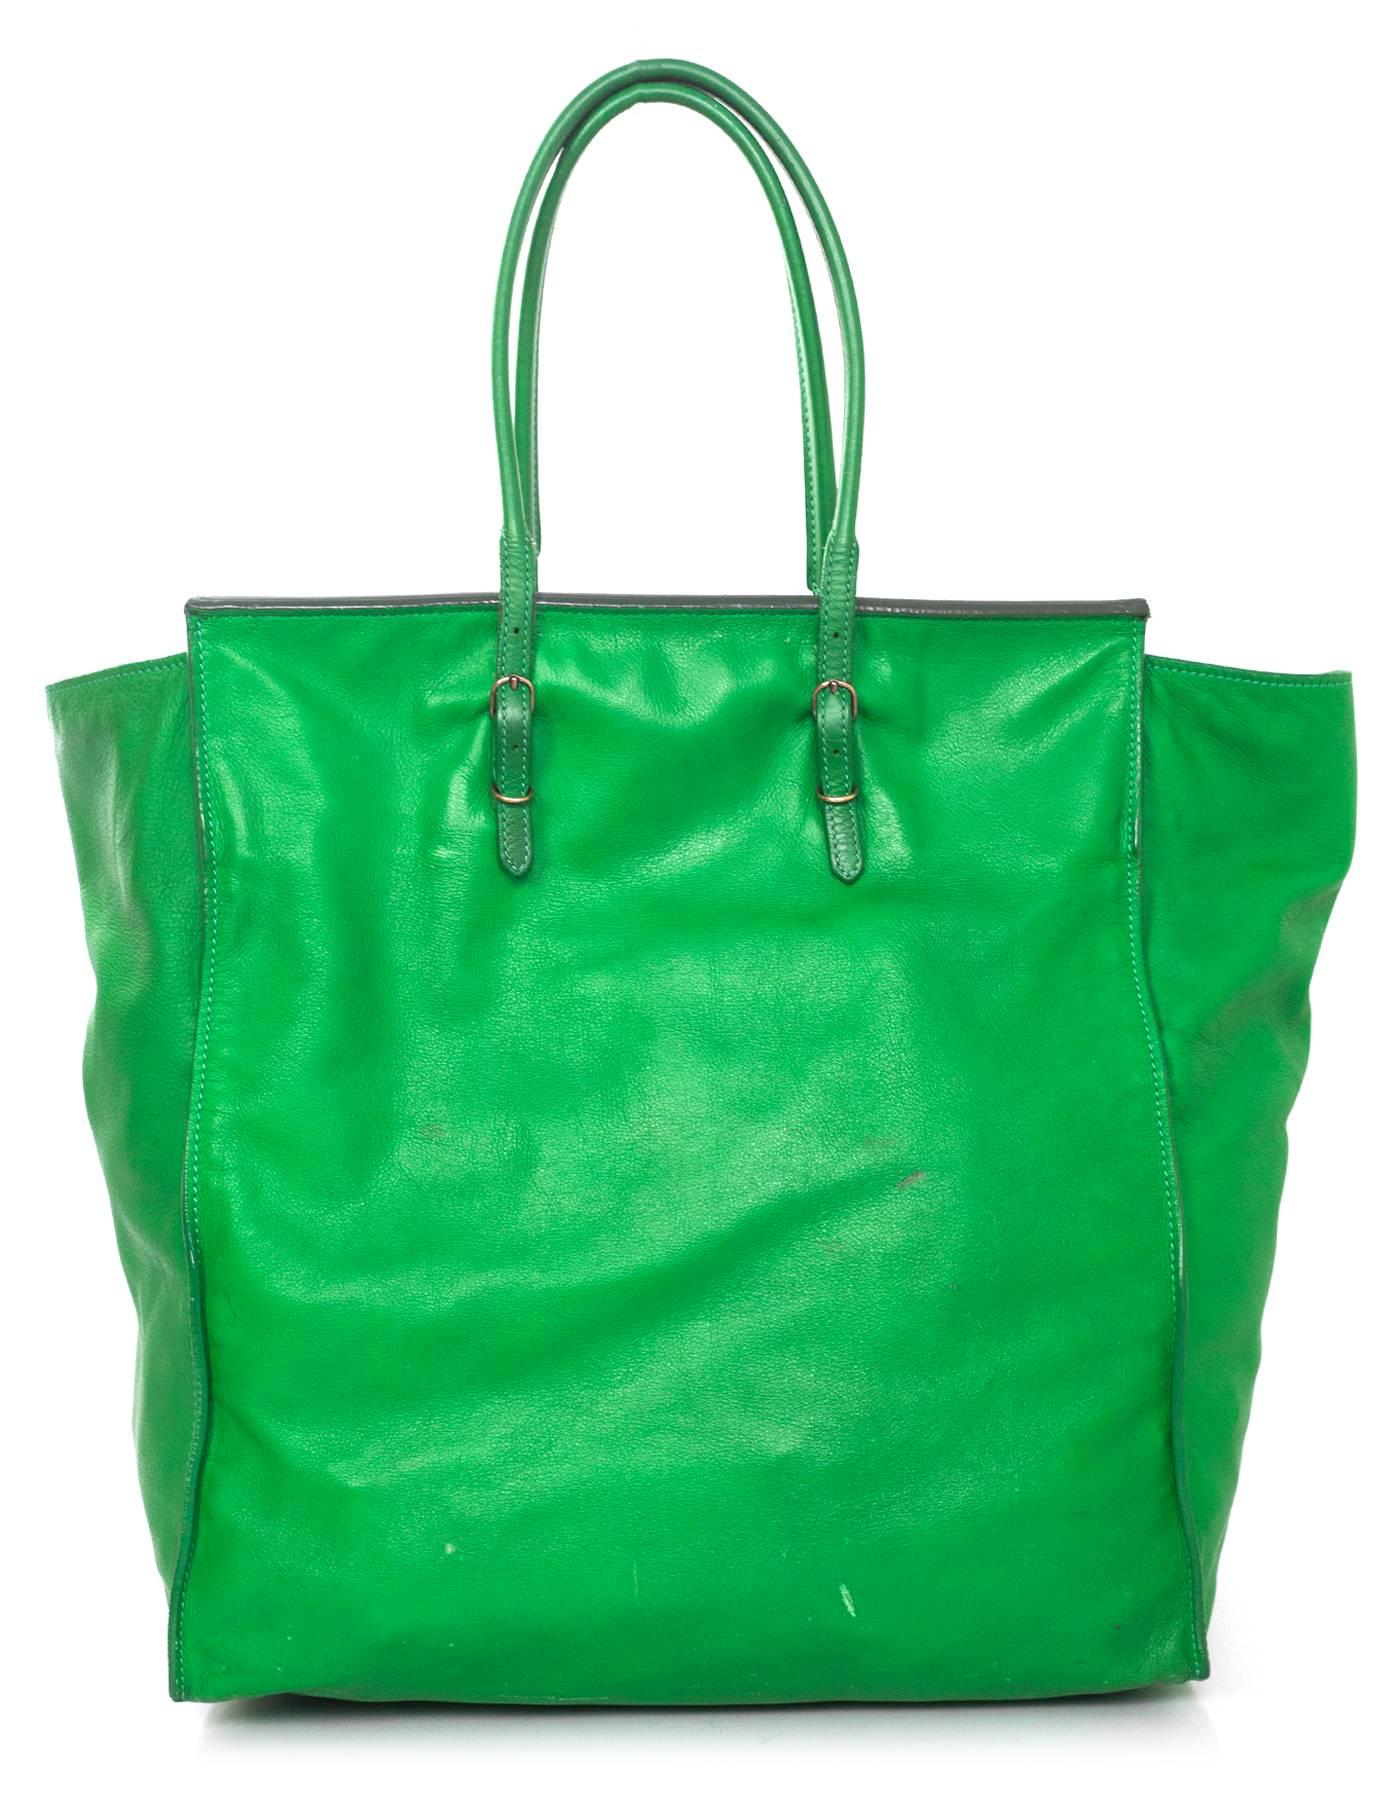 Balenciaga Green Leather Papier Ledger Tote
Features attached small mirror to front zipper pocket

Made In: Italy
Color: Green
Hardware: Bronze
Materials: Leather
Lining: Green suede
Closure/Opening: Open top
Exterior Pockets: One front zipper